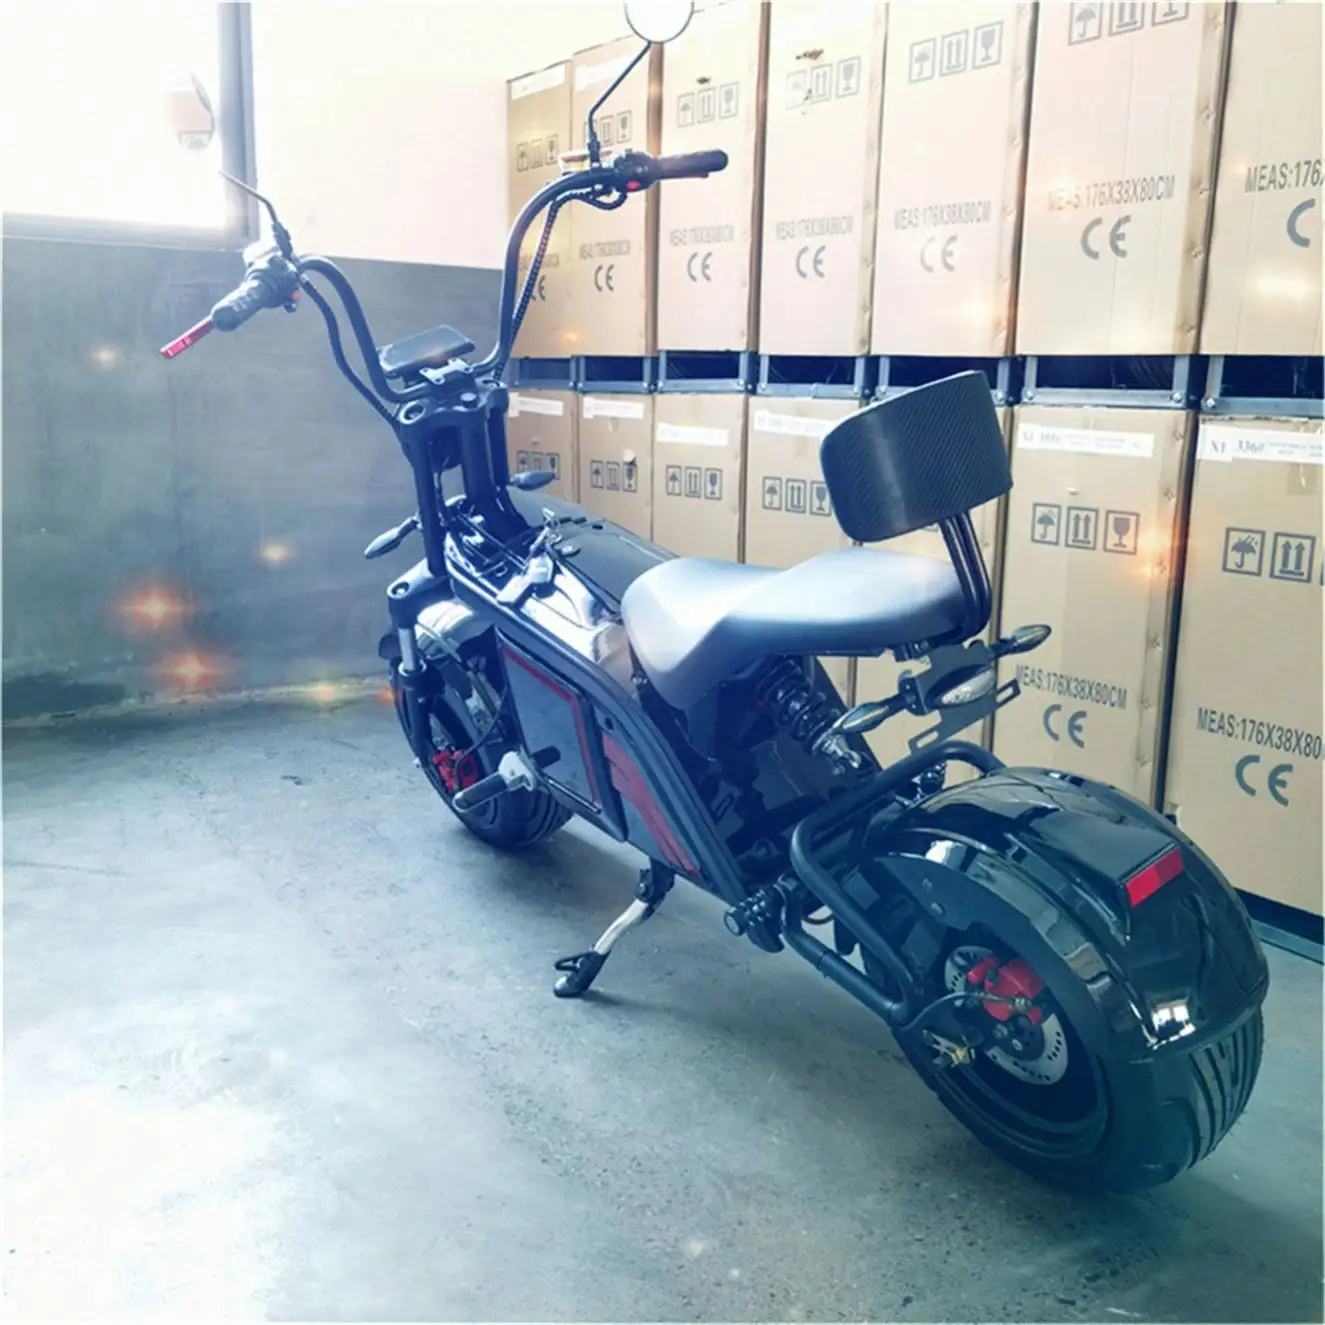 Chinese YIDE Powerful Motor Luxury 2000 Watt 120 KM H Hulk Sport Electric New Model Off Road Motorcycle Standing Scooter